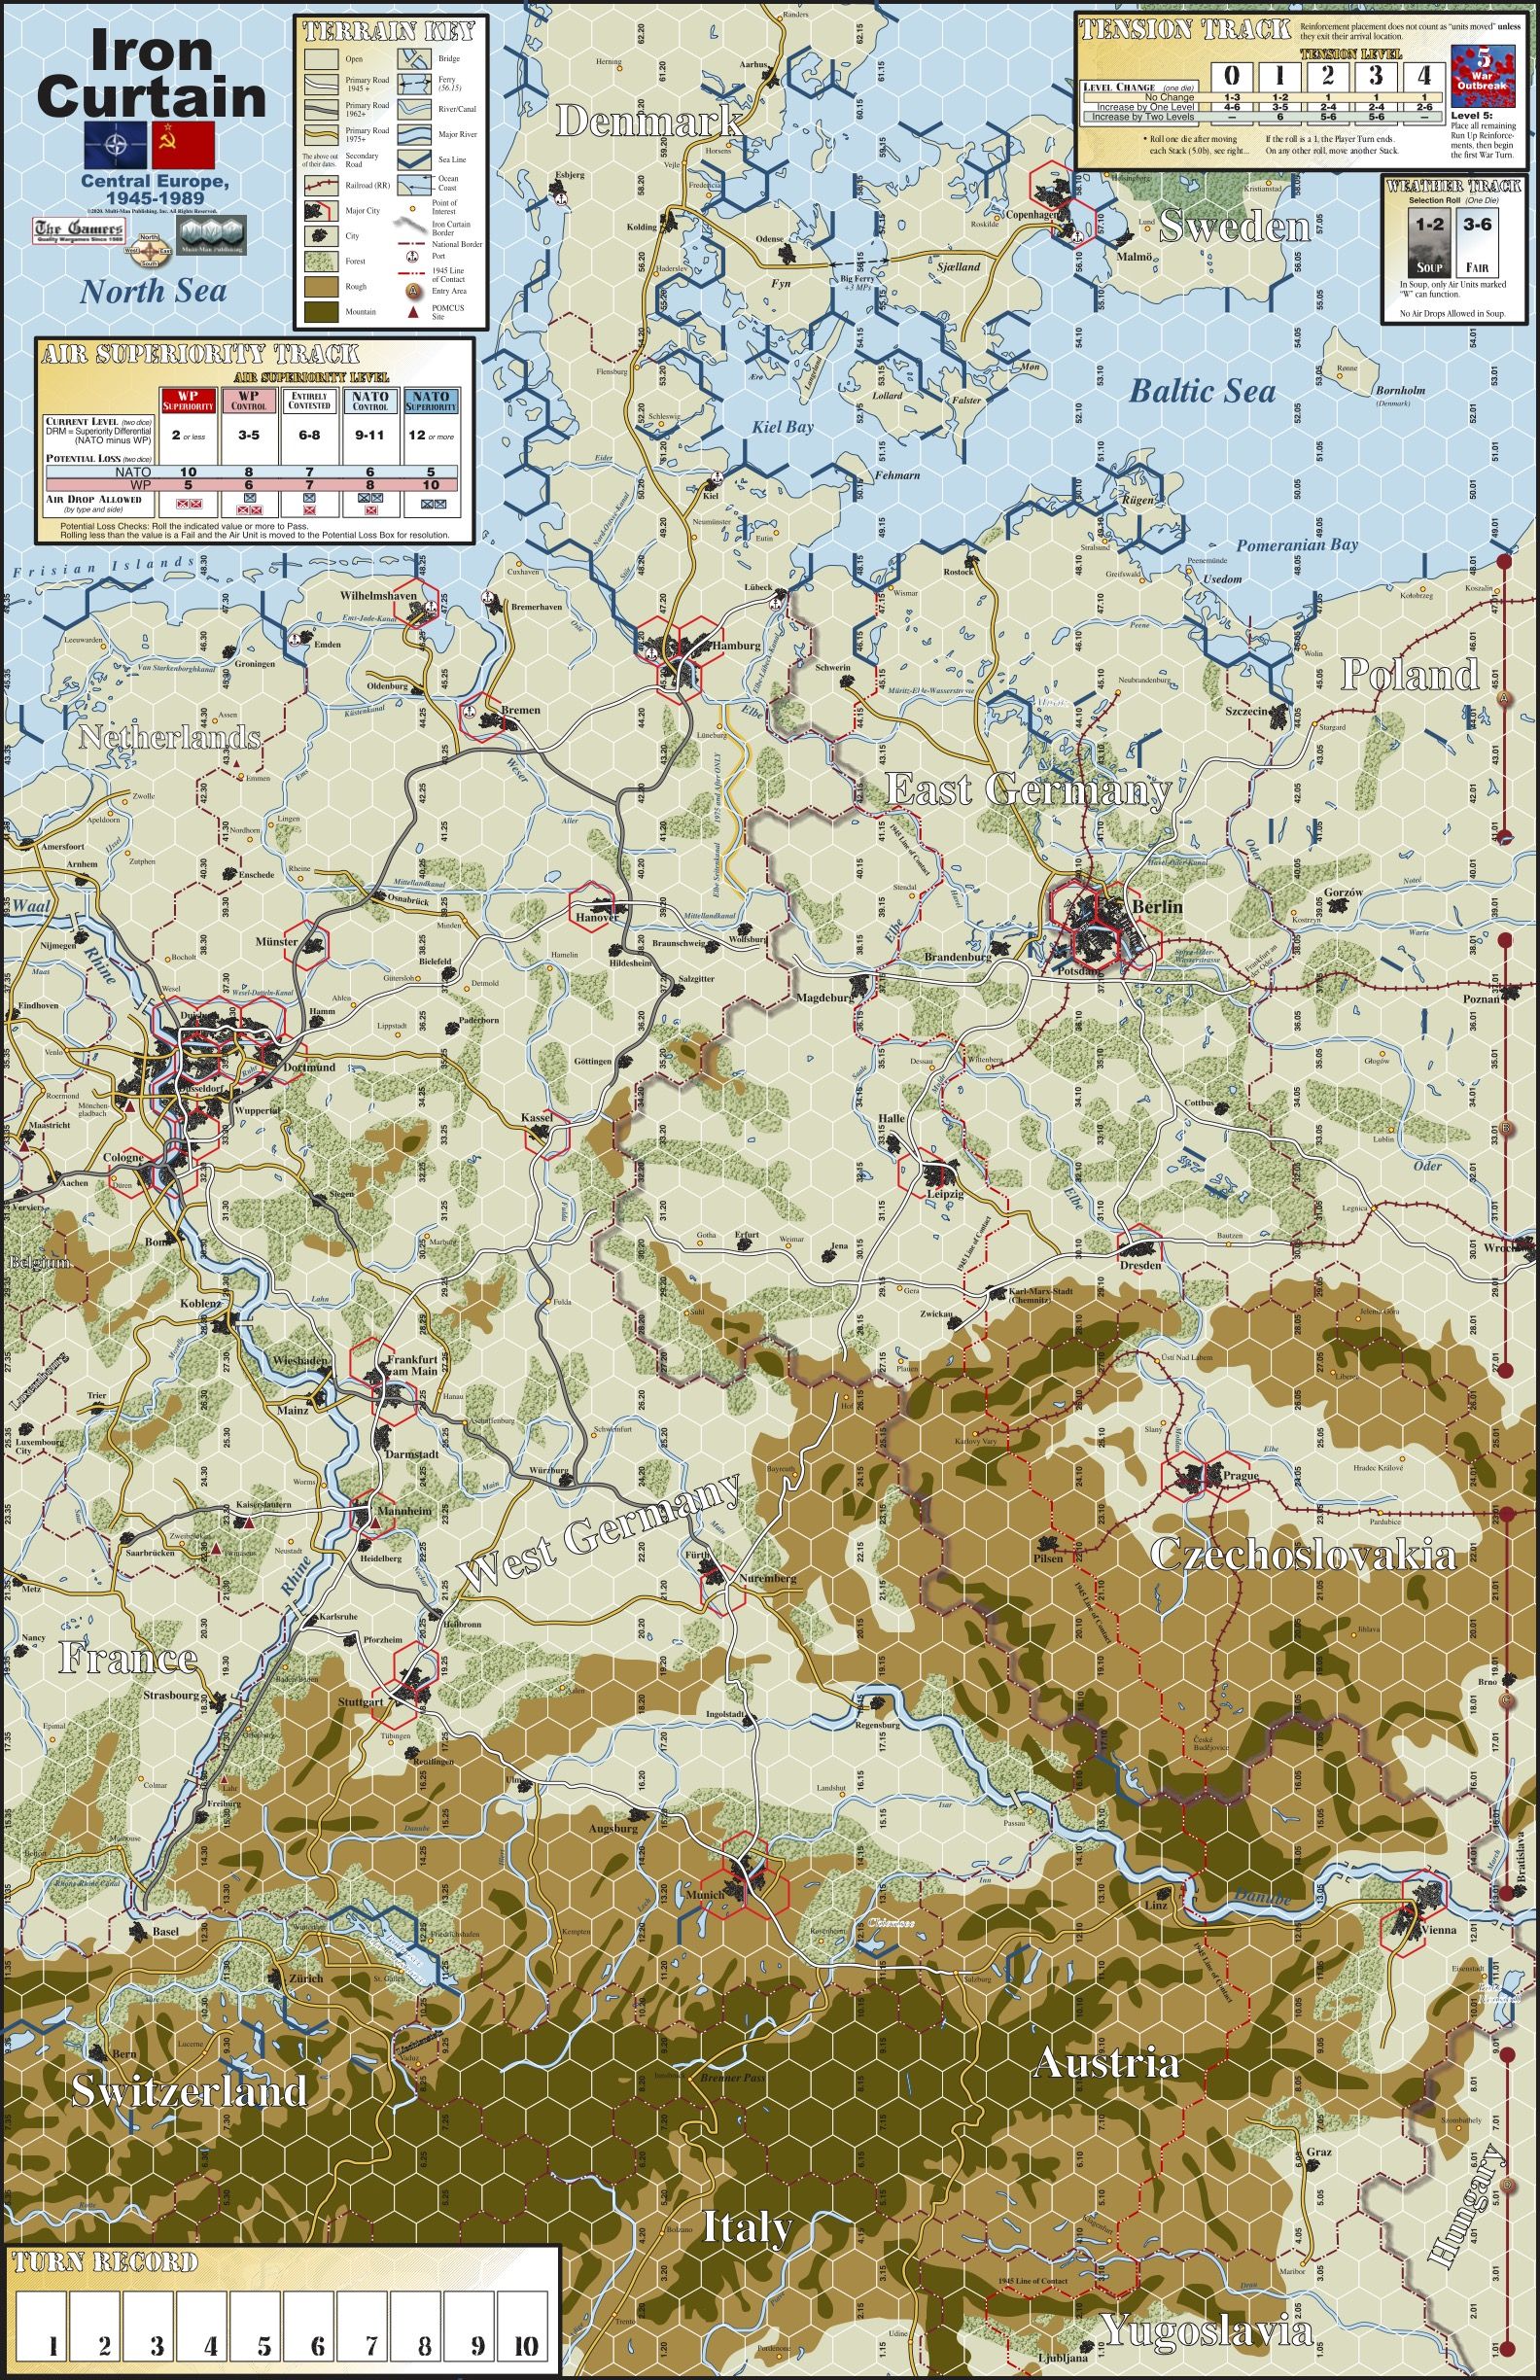 Iron Curtain: Central Europe, 1945-1989 | Image | BoardGameGeek